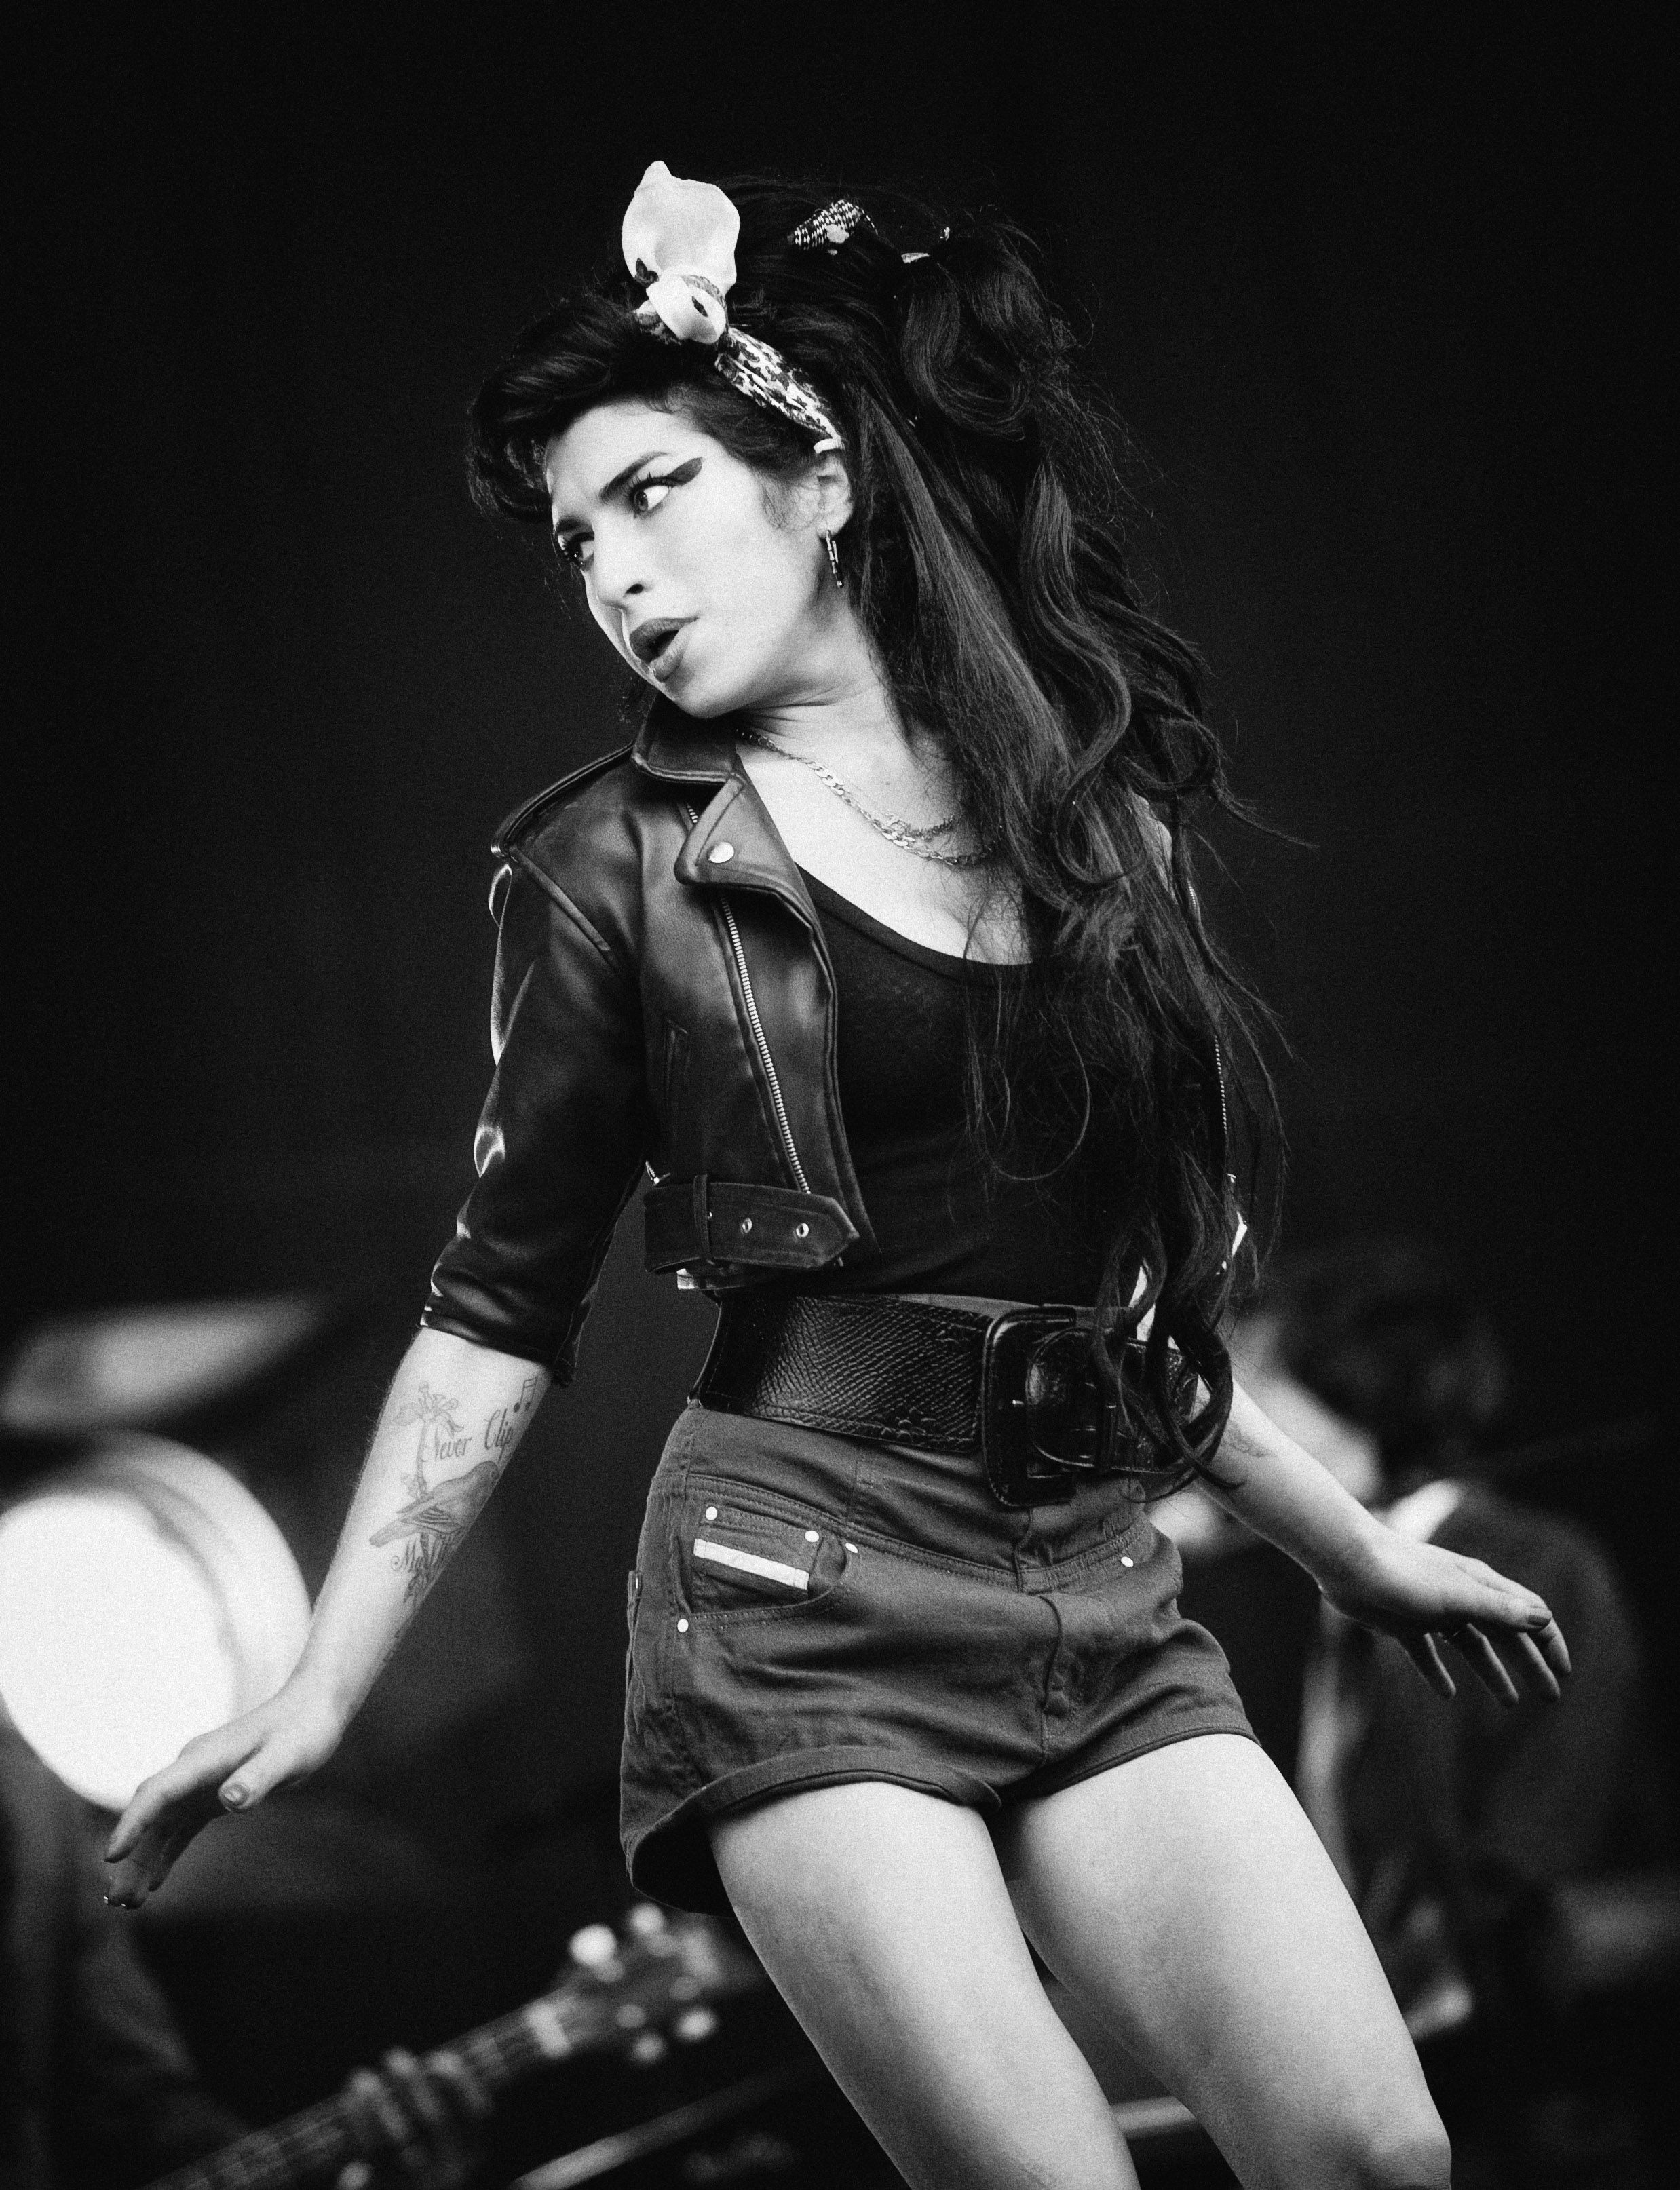 amy winehouse black and white